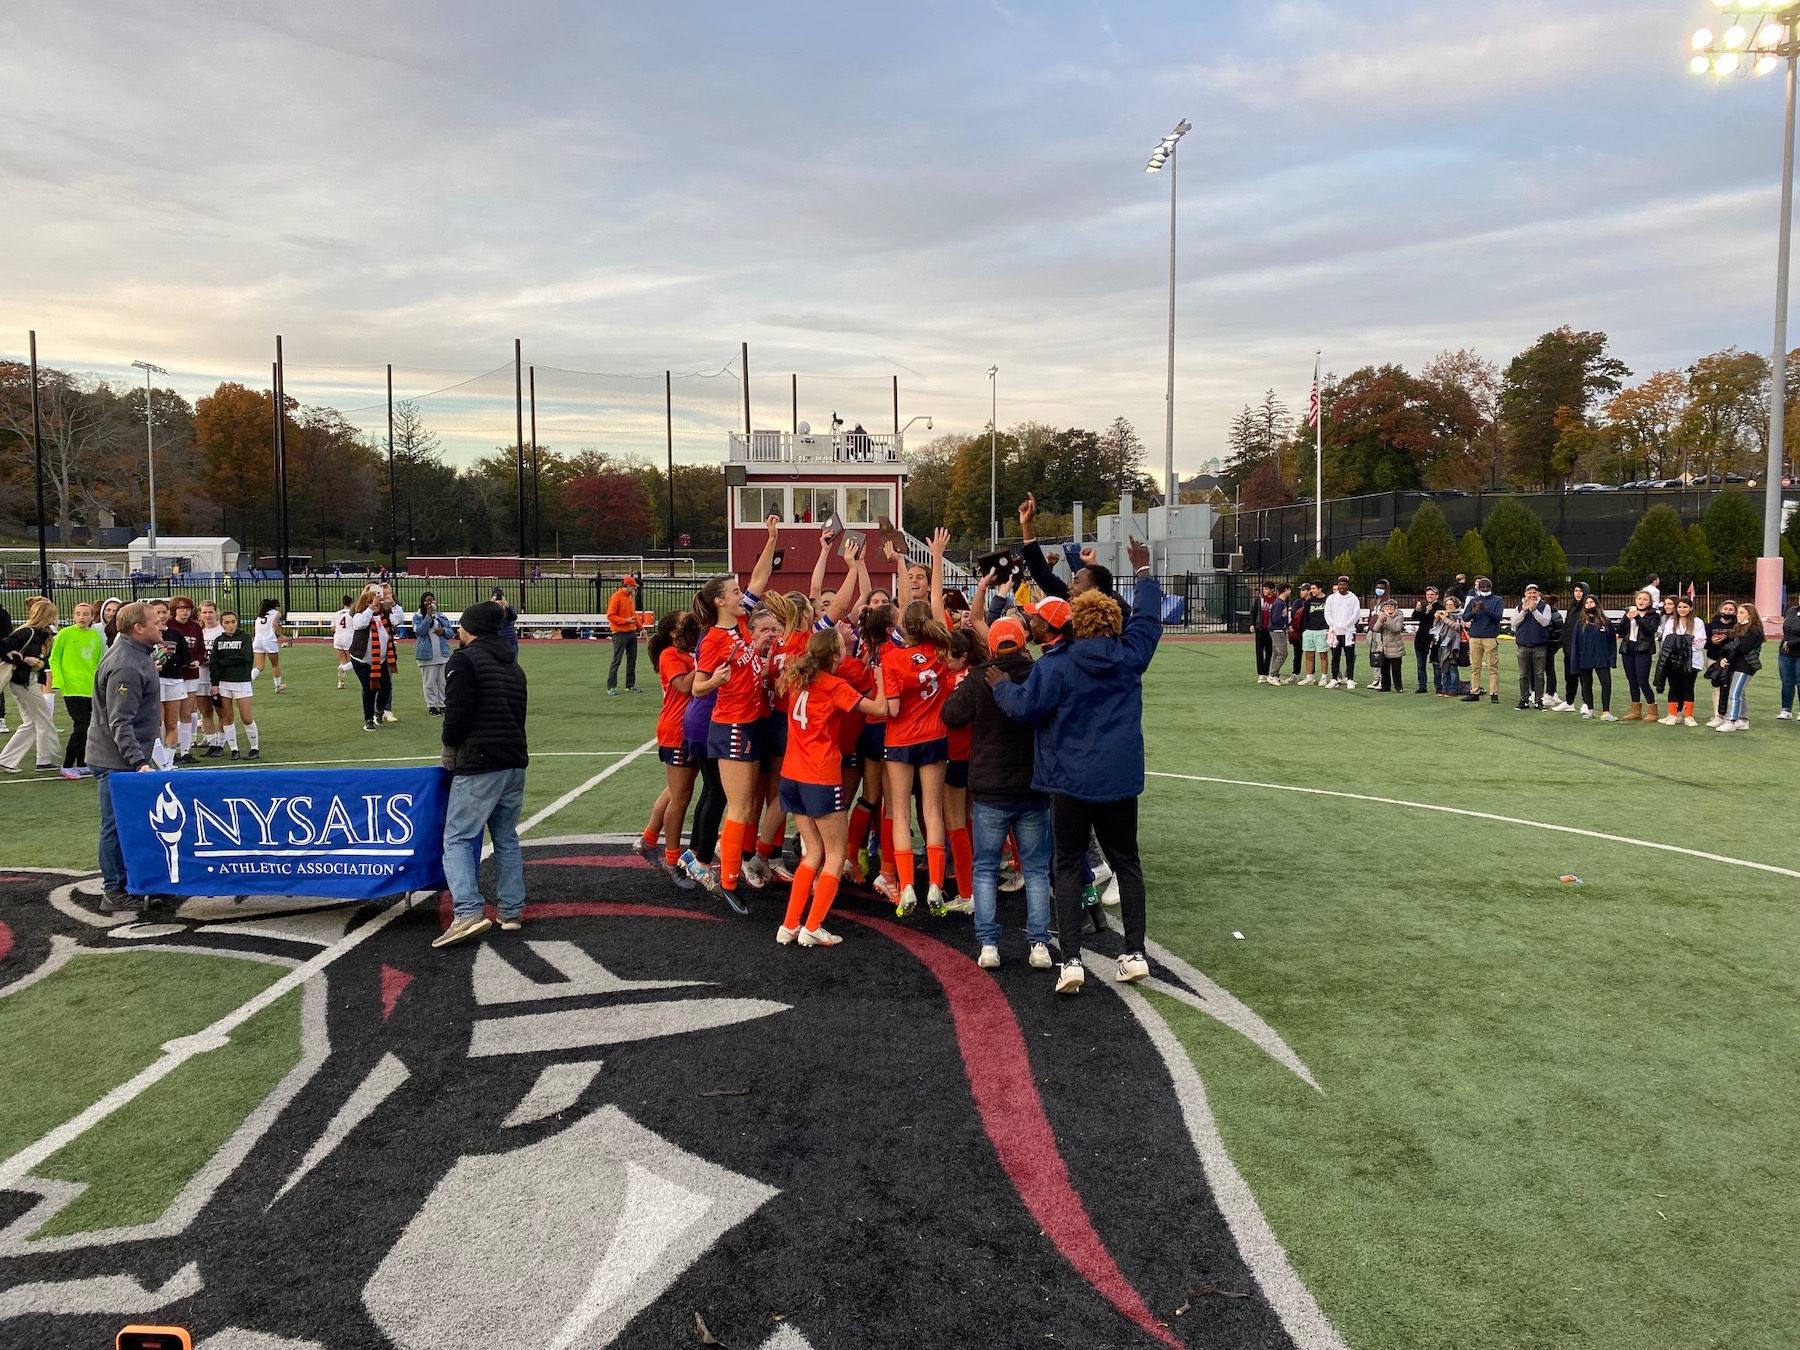 Ethical Culture Fieldston School group of Upper School soccer players celebrate in a group